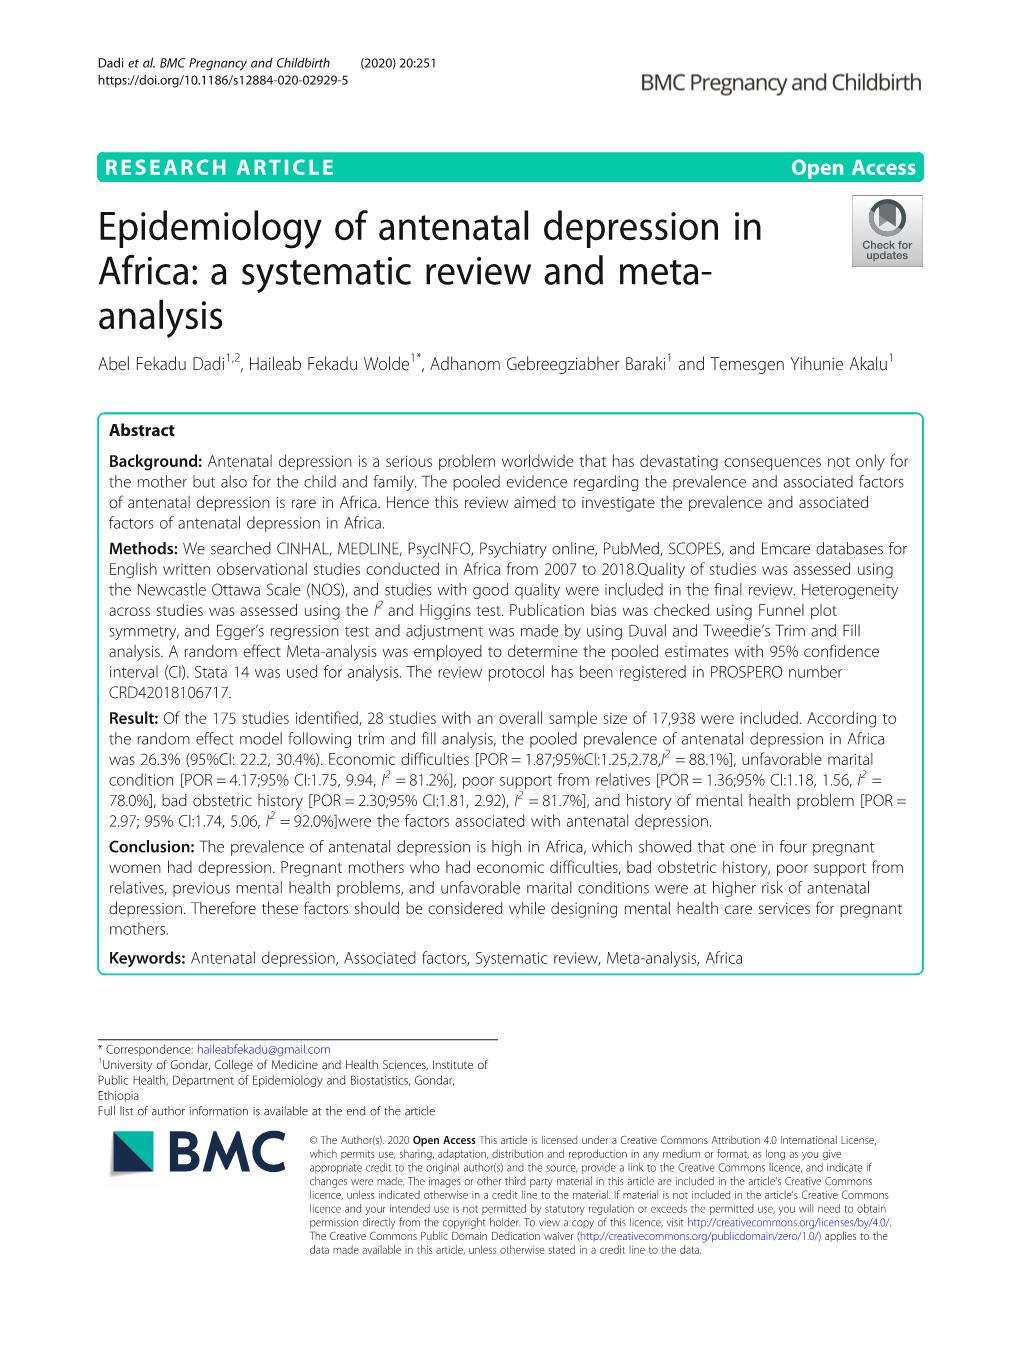 Epidemiology of Antenatal Depression in Africa